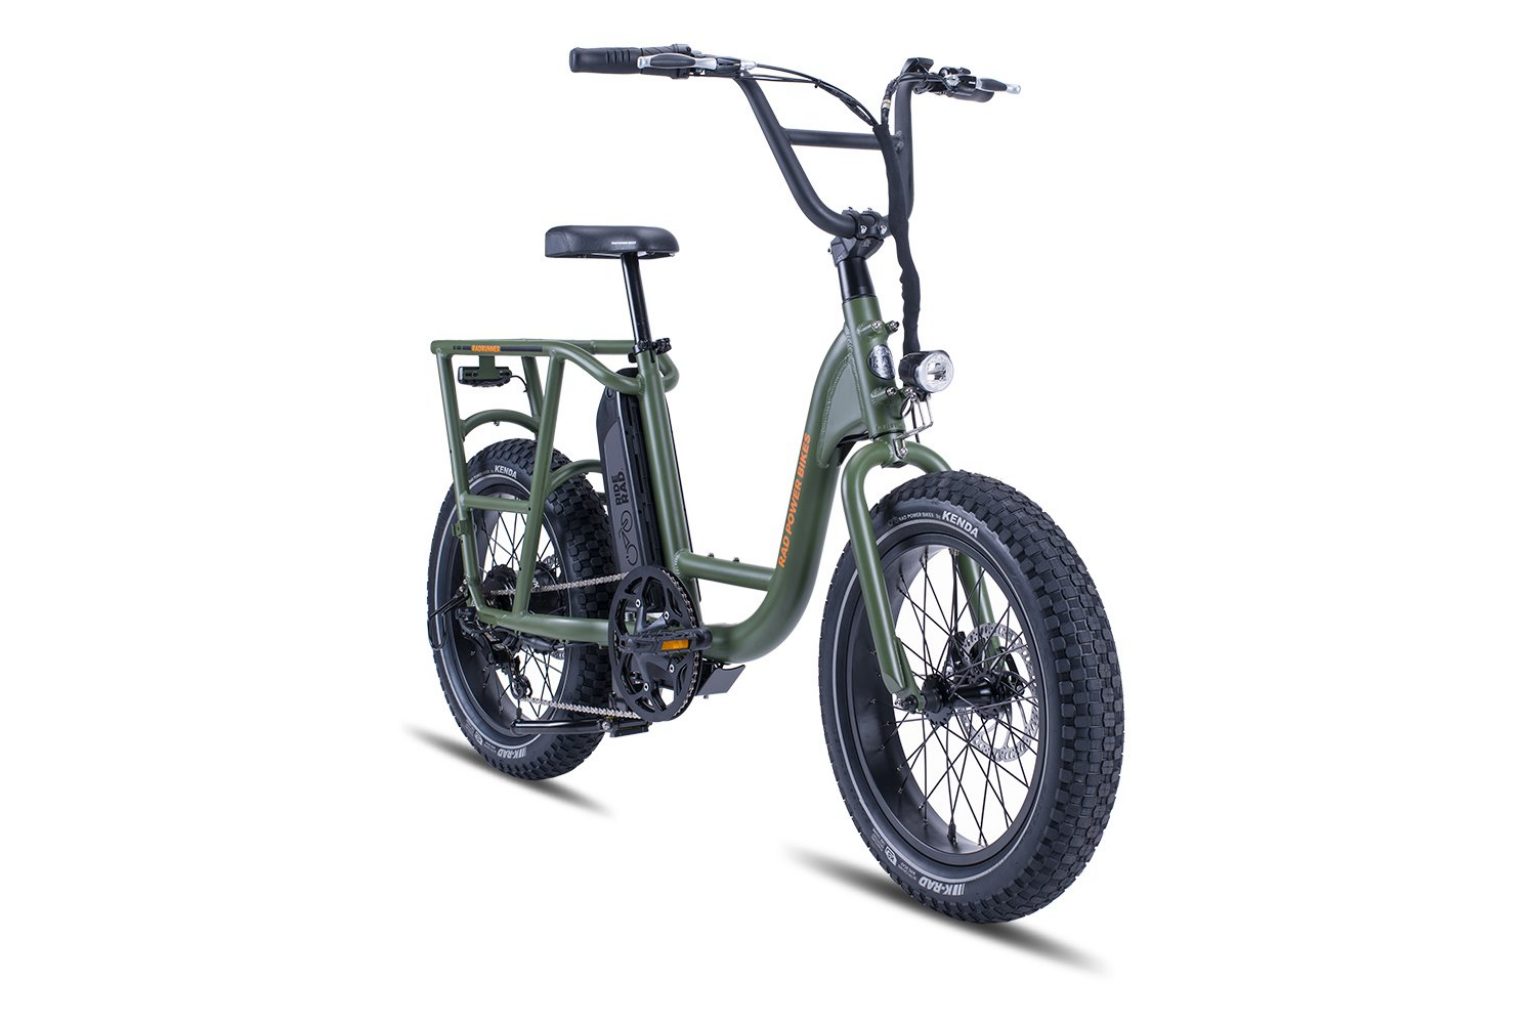 Rad Runner 1 Electric Utility Bike | We Are The Cyclists